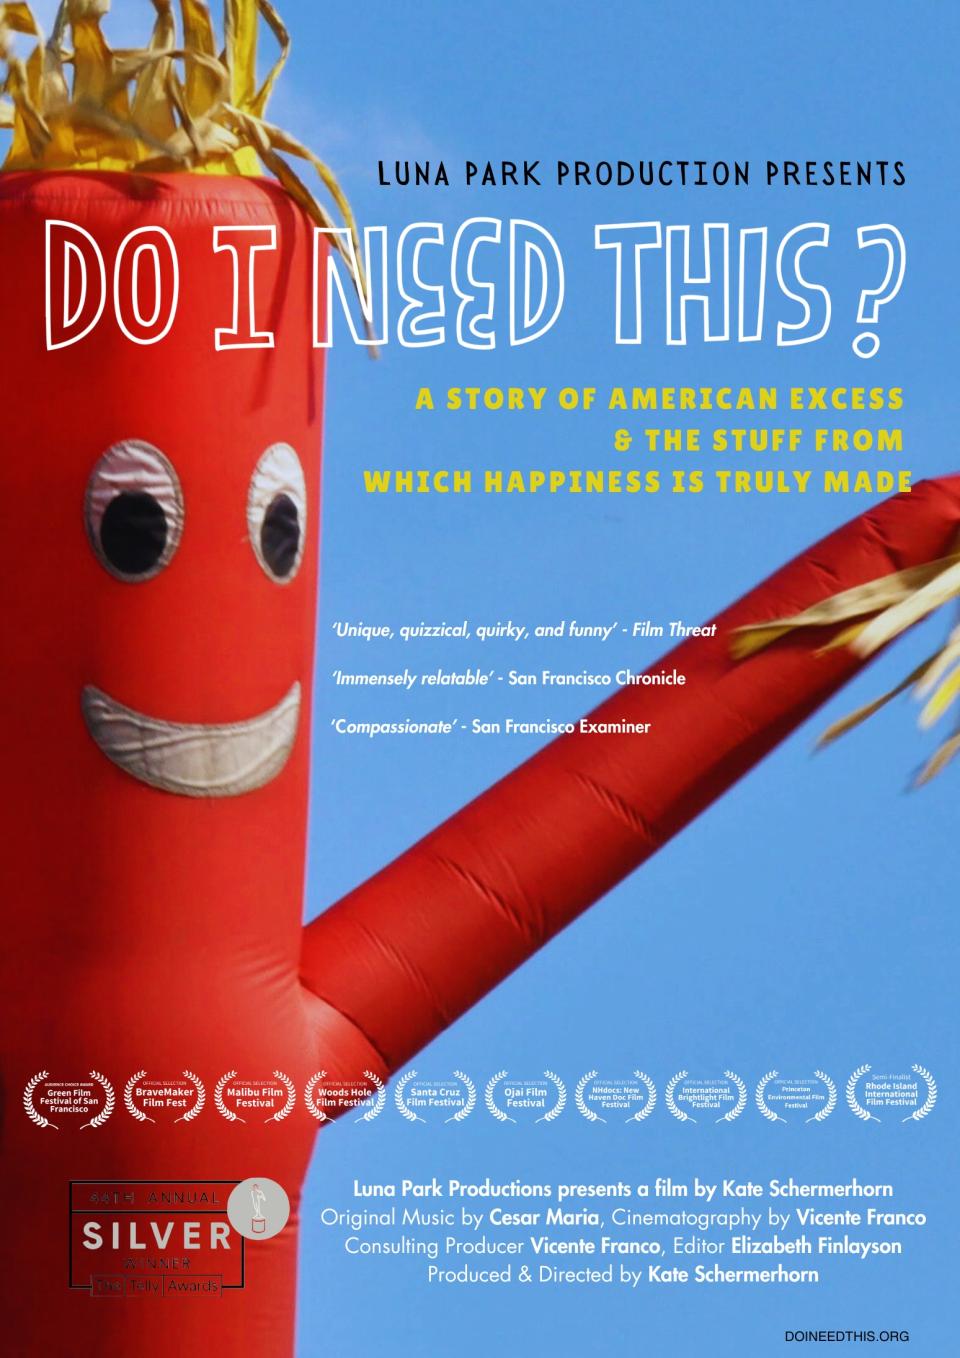 Red inflatable balloon man and text saying Do I Need This?